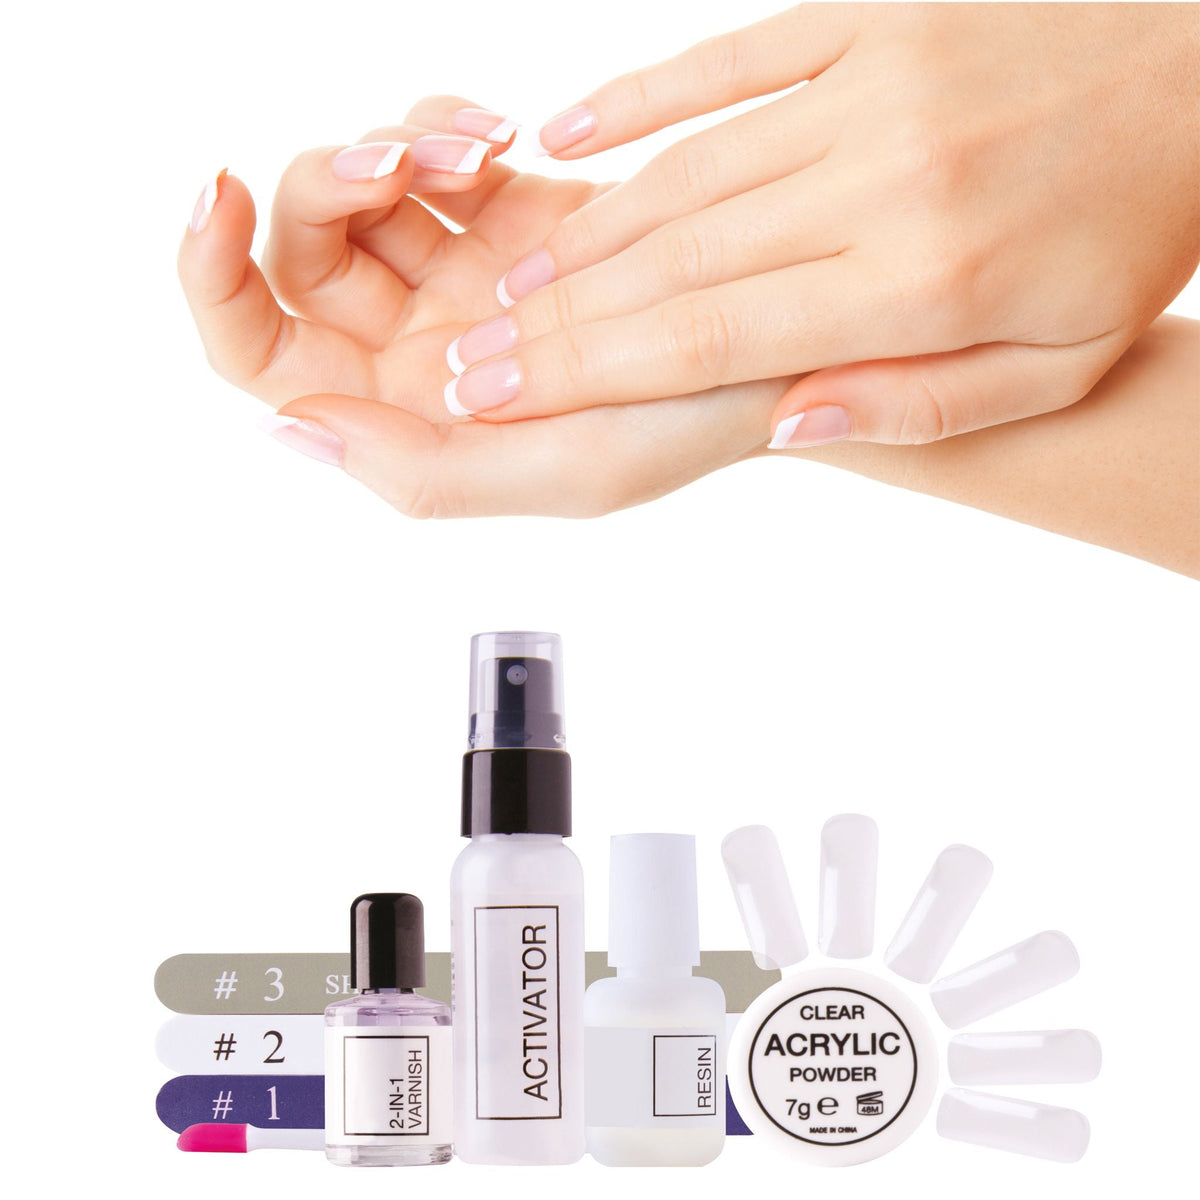 Quick dip acrylic nail extension kit with ladies hands showing french tip acrylic manicure